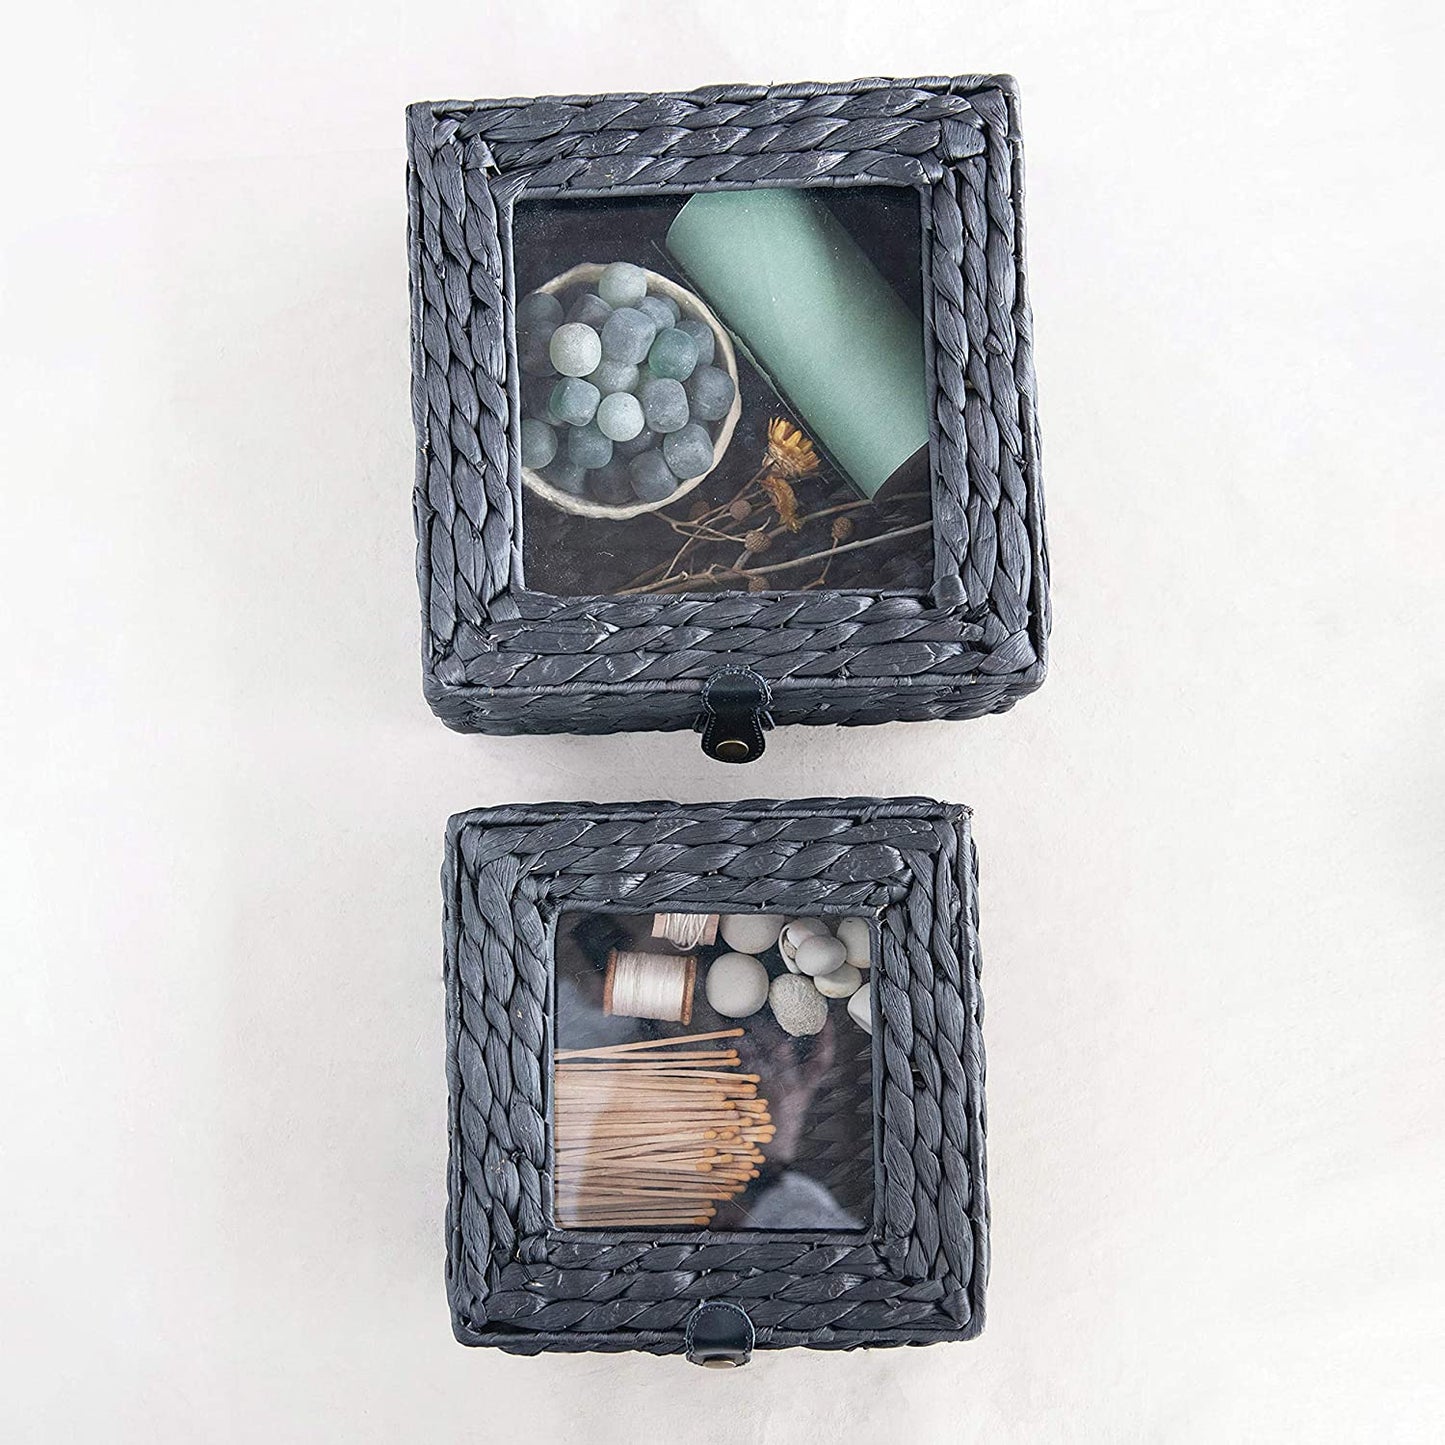 Hand-Woven Seagrass & Glass Display Box with Lid Set of 2